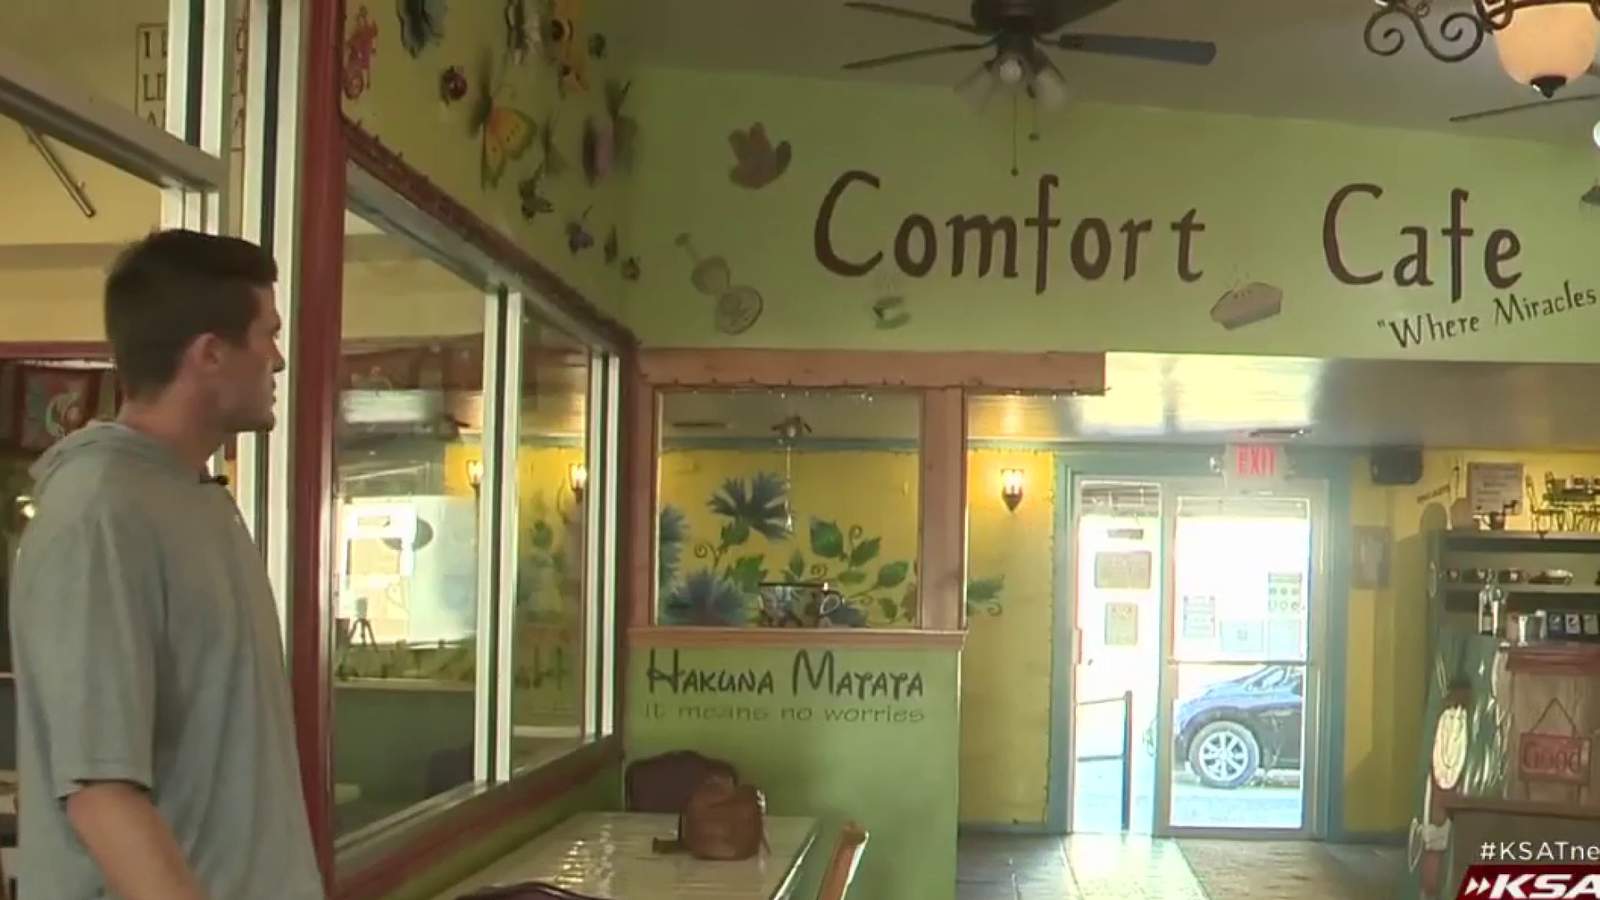 What’s Up South Texas!: Cafe serves as recovery center for those battling drug, alcohol addiction